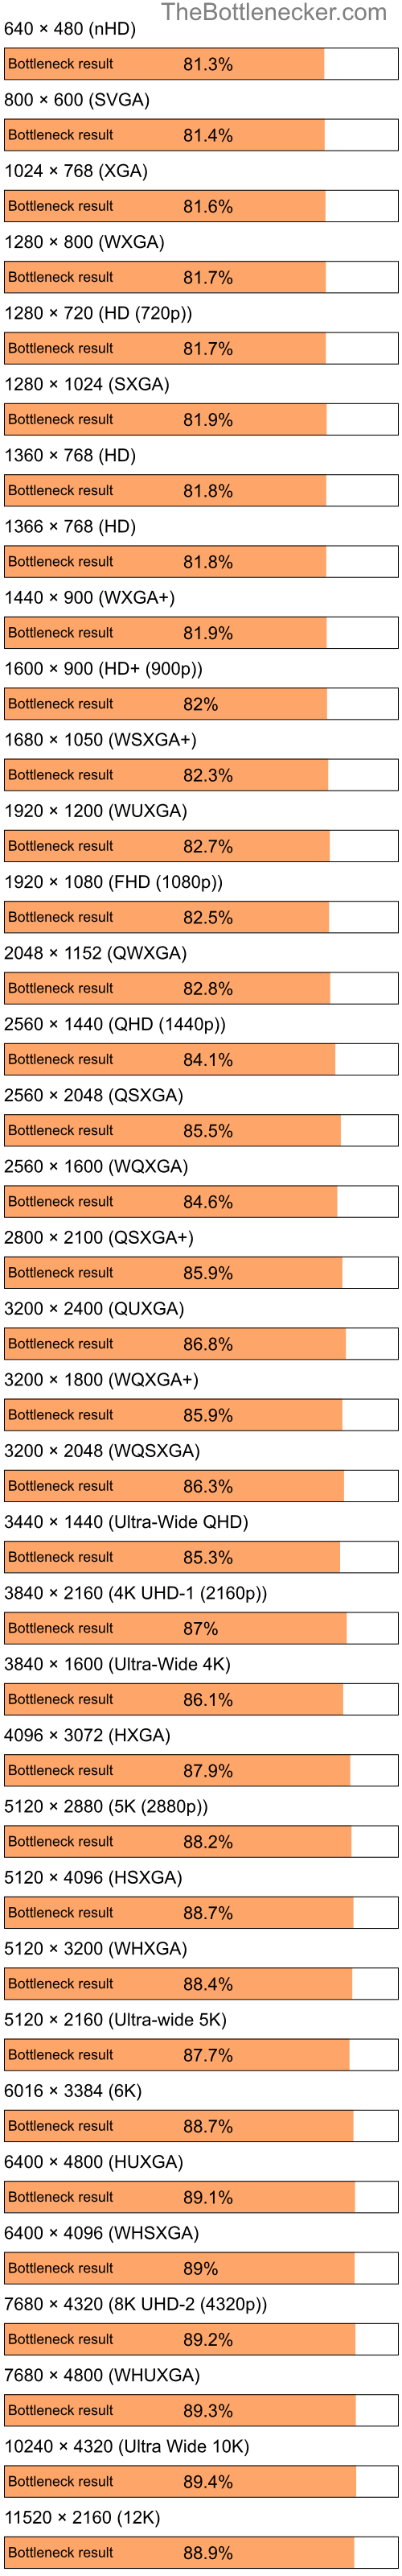 Bottleneck results by resolution for Intel Celeron M and AMD Mobility Radeon 9700 in Graphic Card Intense Tasks